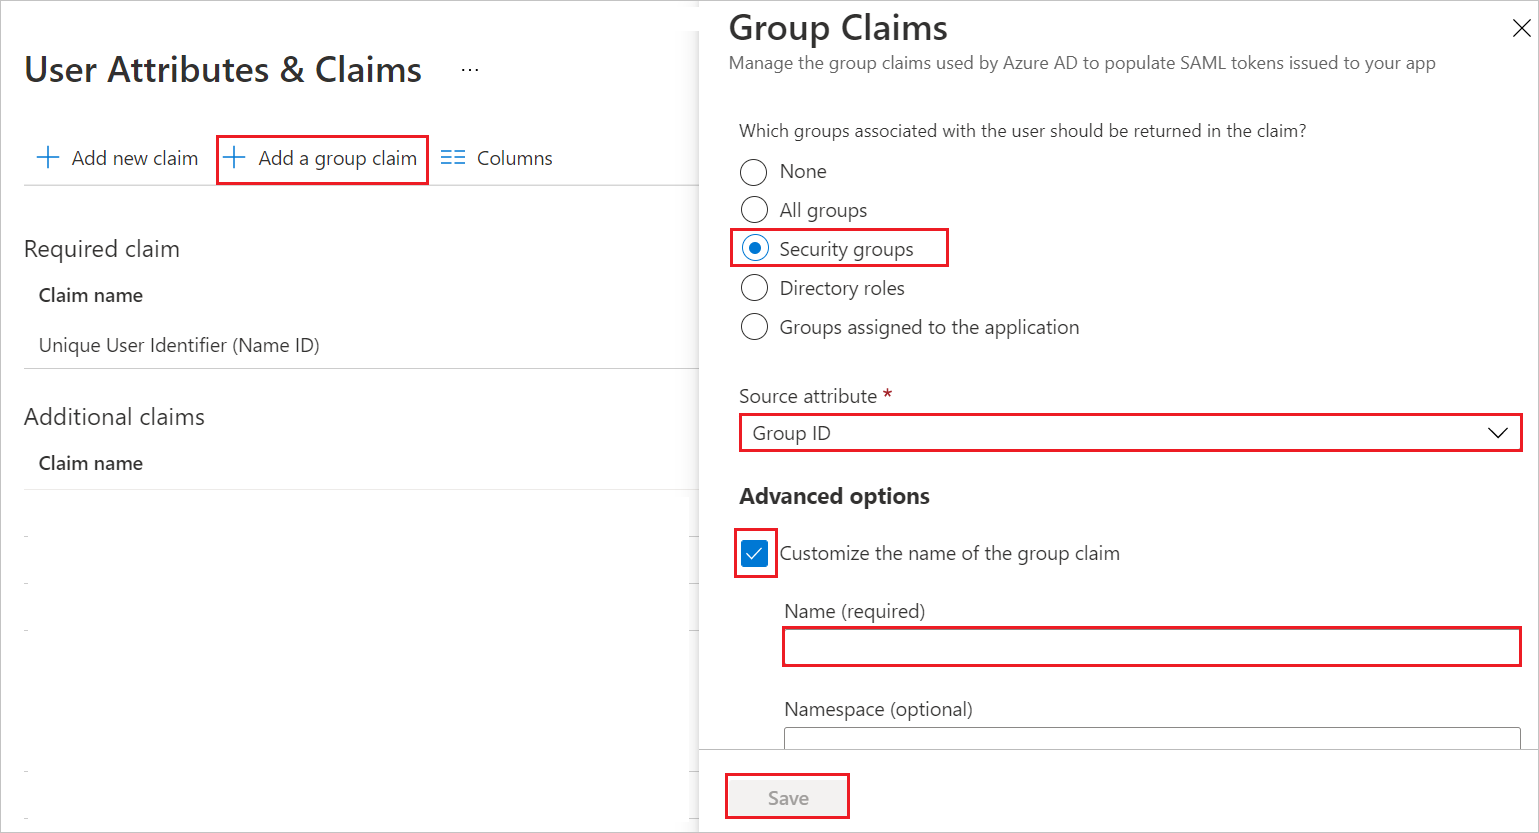 Screenshot for User Attributes & Claims.